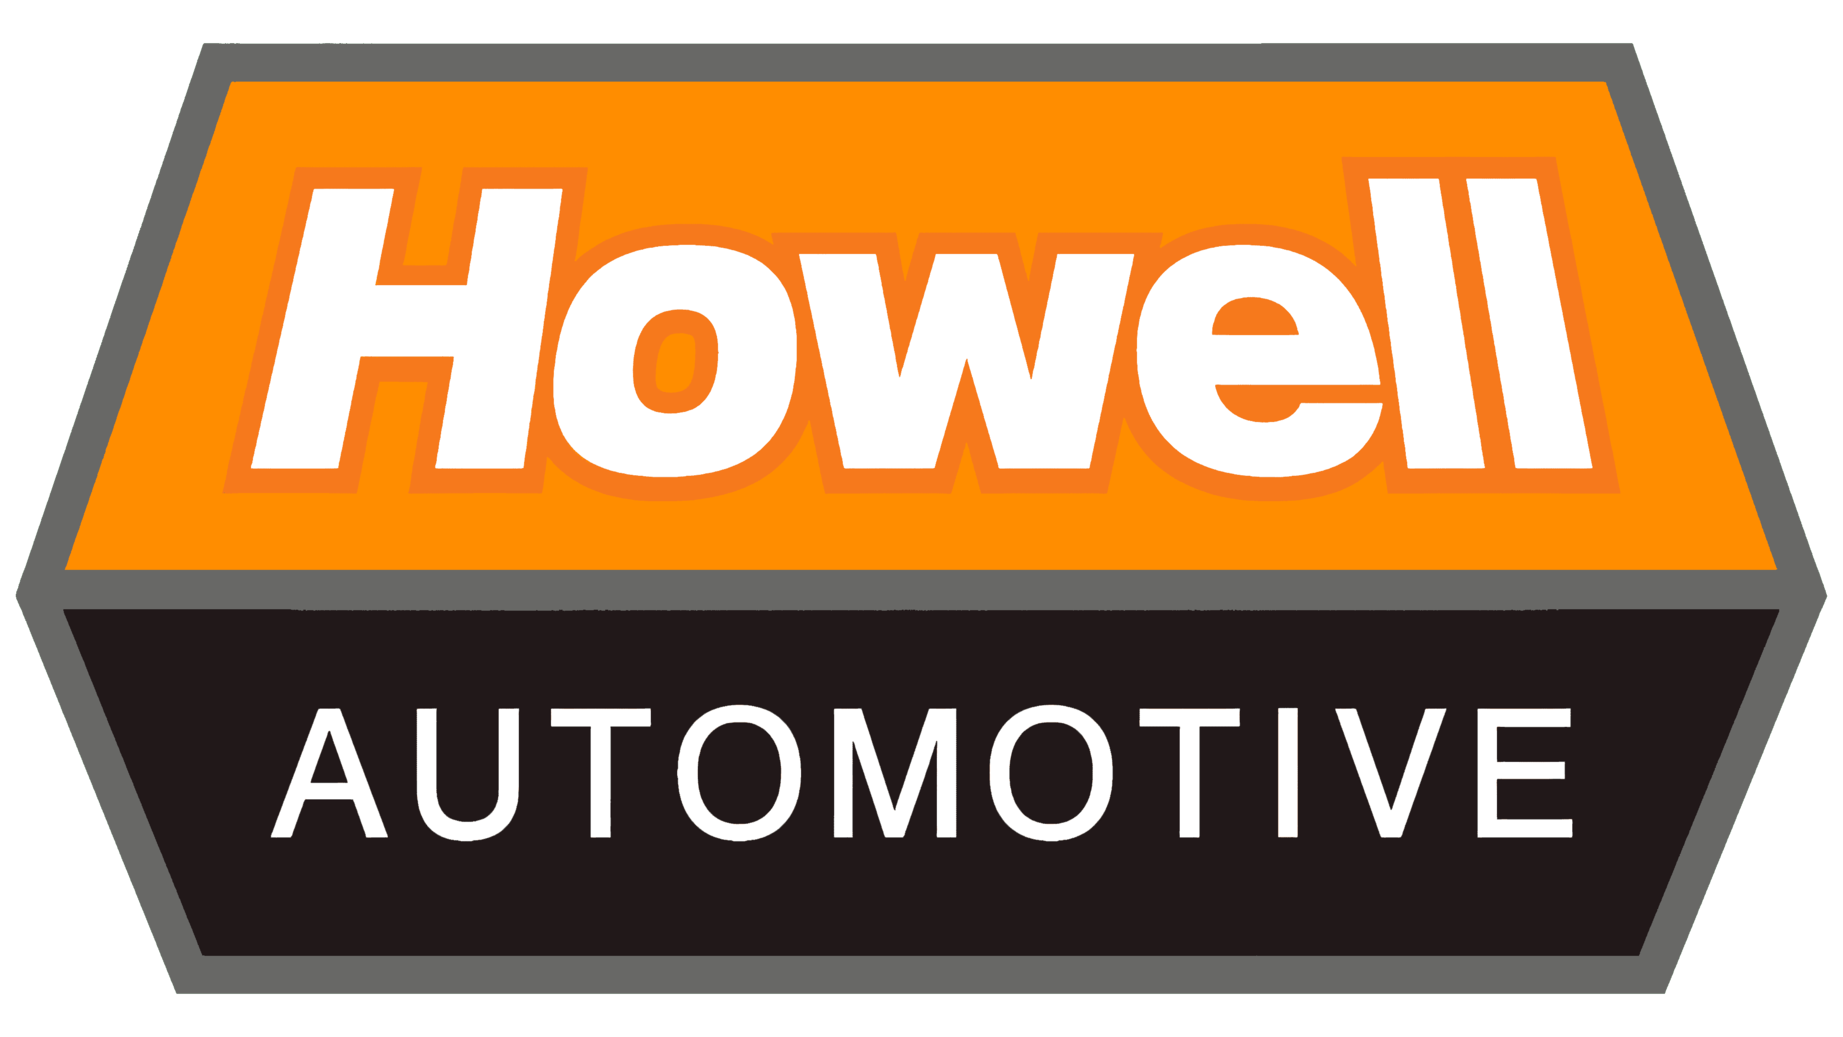 Howell automotive sign